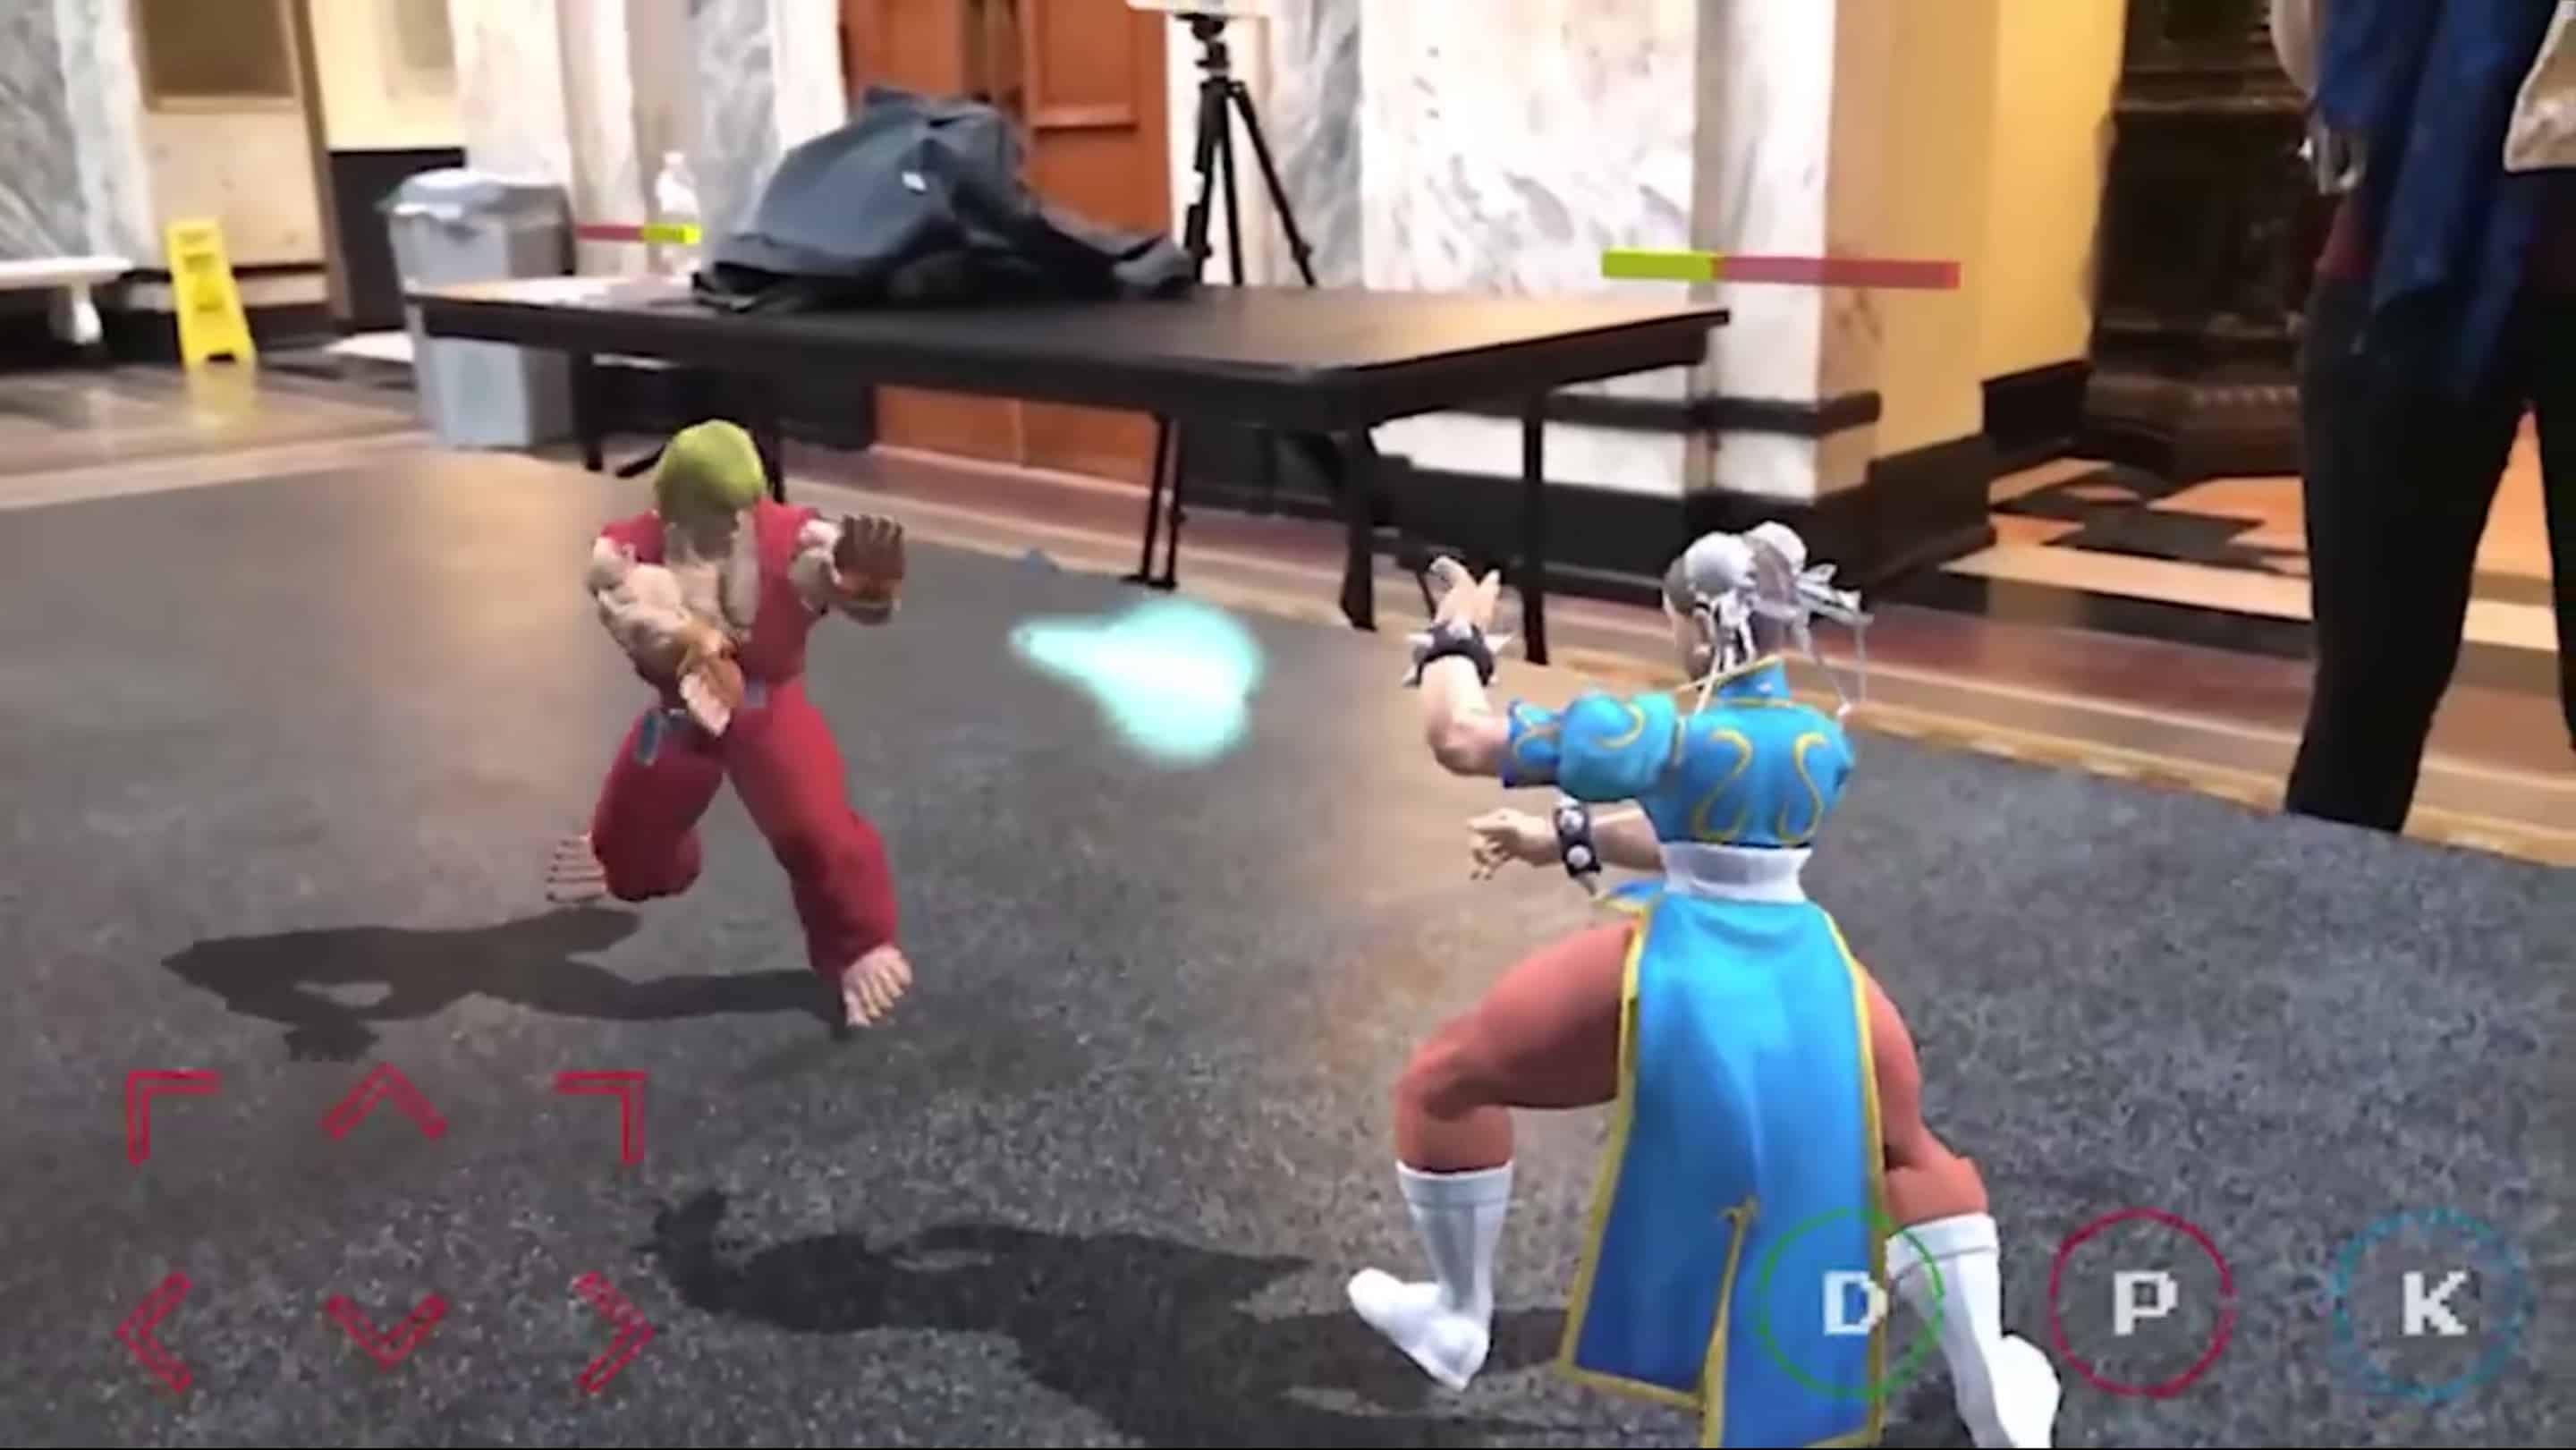 Street Fighter II in AR shows that old games can learn new tricks.